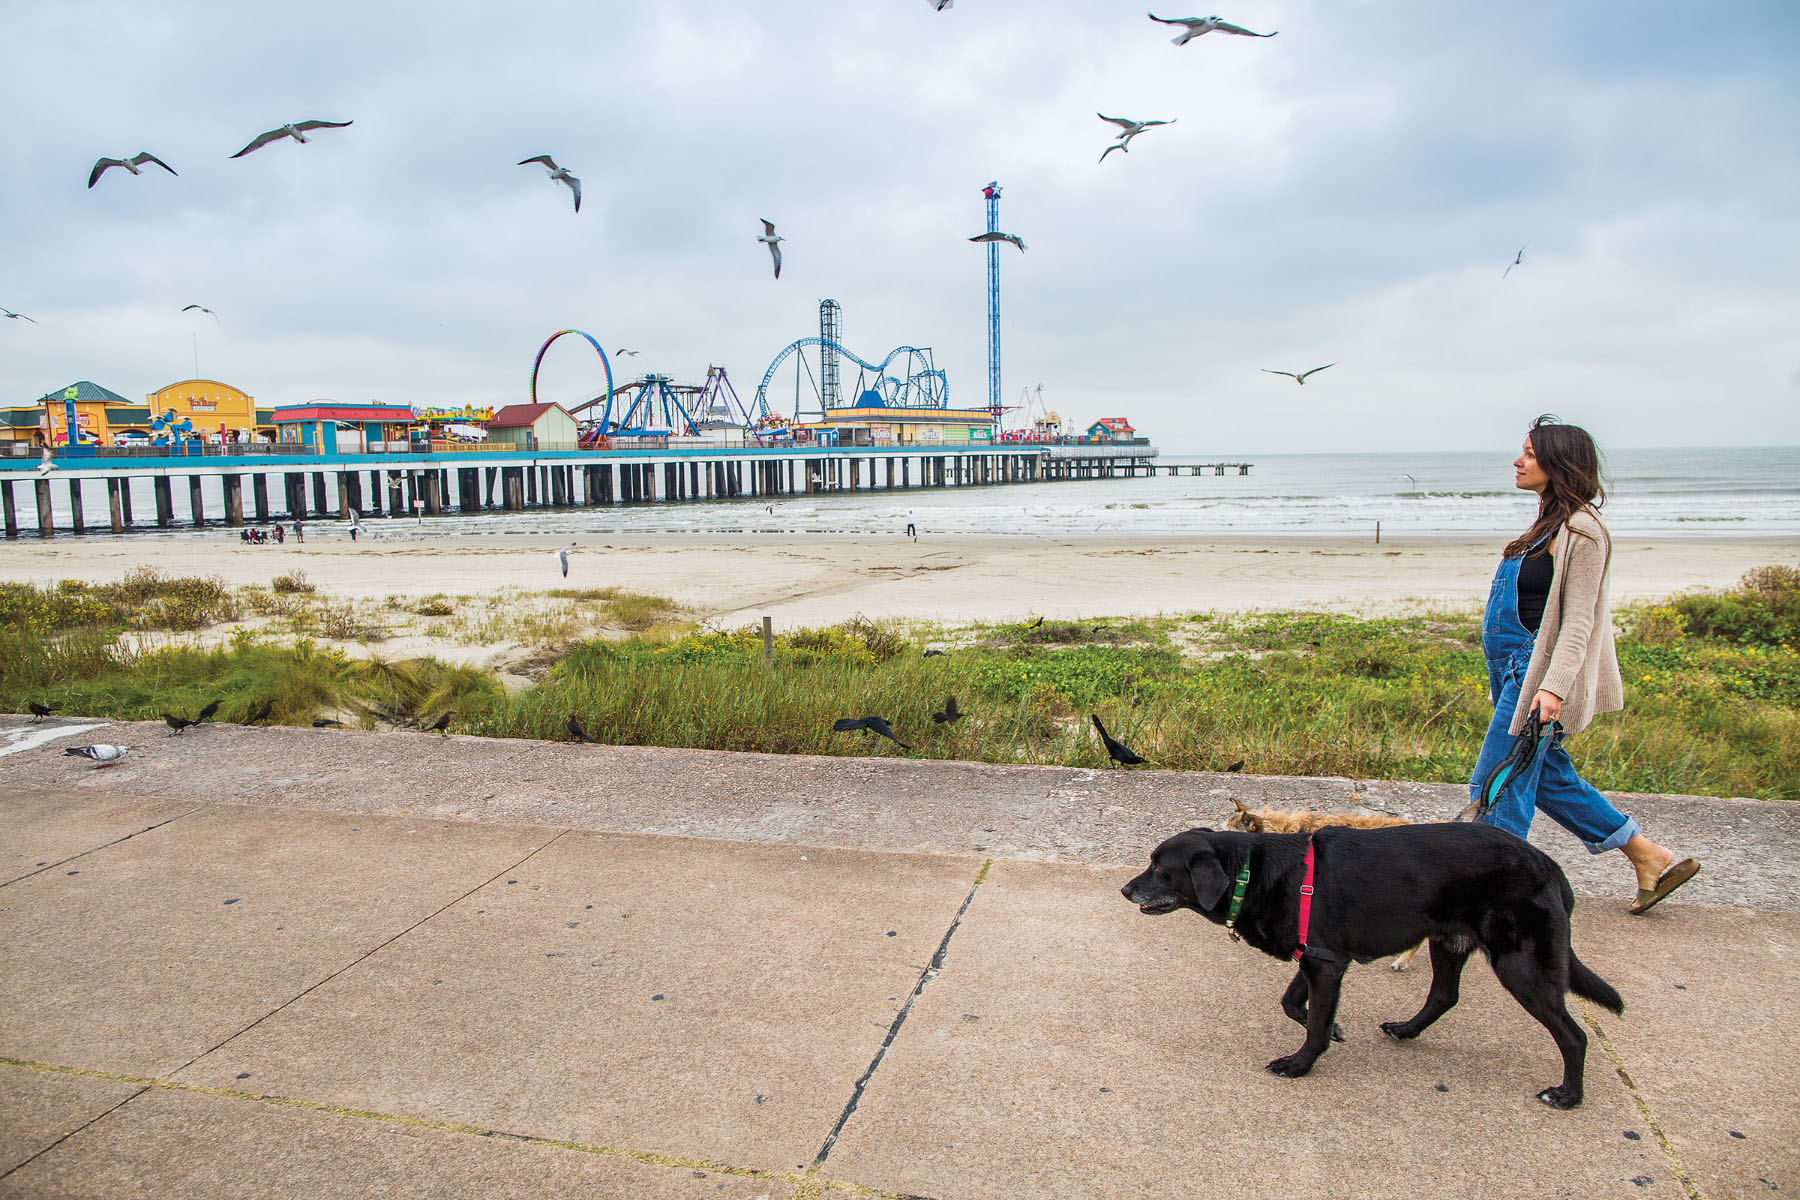 A woman in blue overalls walks a large black dog along a sidewalk with Galveston's iconic Pleasure Pier and the Gulf of Mexico in the background